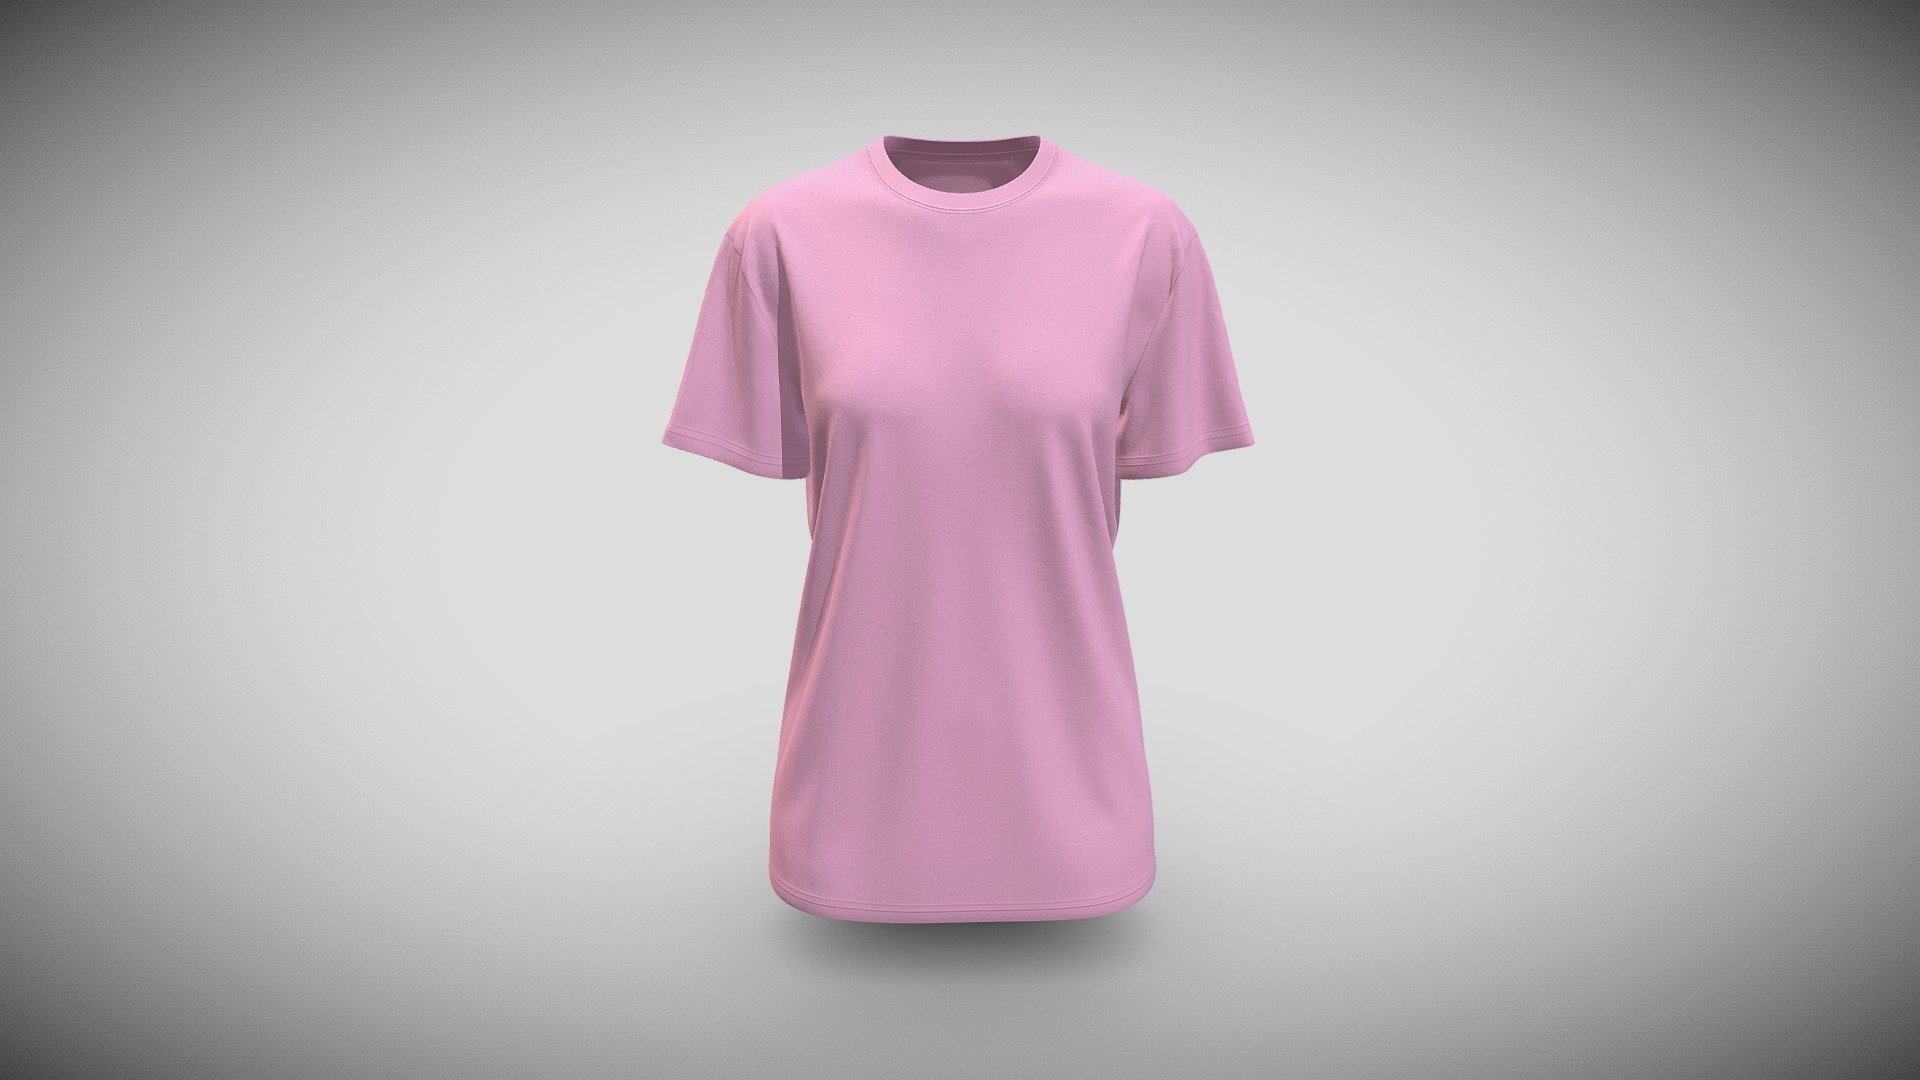 Cloth Title = Round Neck Womens Tops &amp; T-Shirts 

SKU = DG100111 

Category = Women 

Product Type = Tee 

Cloth Length = Regular 

Body Fit = Regular Fit 

Occasion = Casual  

Sleeve Style = Set In Sleeve 


Our Services:

3D Apparel Design.

OBJ,FBX,GLTF Making with High/Low Poly.

Fabric Digitalization.

Mockup making.

3D Teck Pack.

Pattern Making.

2D Illustration.

Cloth Animation and 360 Spin Video.


Contact us:- 

Email: info@digitalfashionwear.com 

Website: https://digitalfashionwear.com 

WhatsApp No: +8801759350445 


We designed all the types of cloth specially focused on product visualization, e-commerce, fitting, and production. 

We will design: 

T-shirts 

Polo shirts 

Hoodies 

Sweatshirt 

Jackets 

Shirts 

TankTops 

Trousers 

Bras 

Underwear 

Blazer 

Aprons 

Leggings 

and All Fashion items. 





Our goal is to make sure what we provide you, meets your demand 3d model